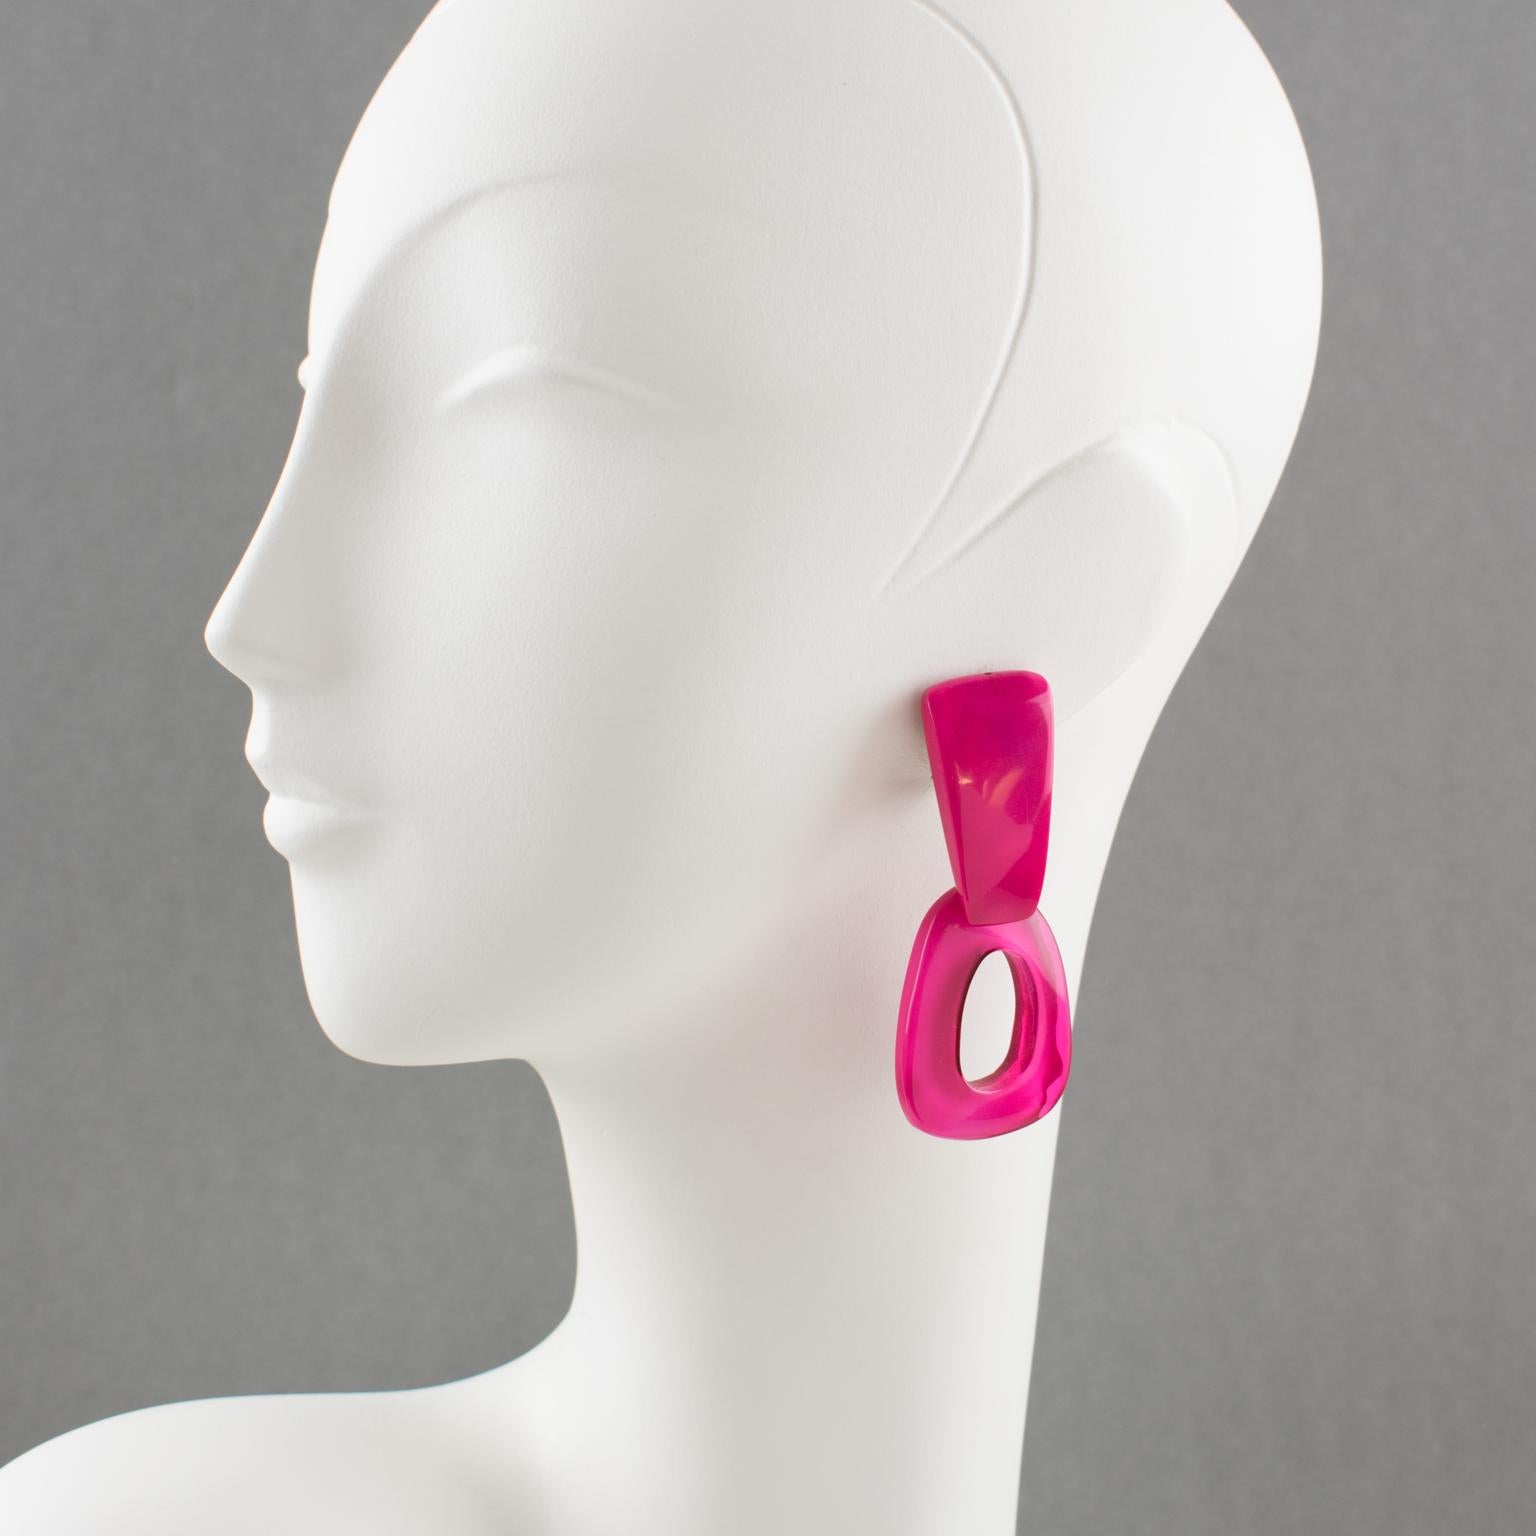 Lovely dangling clip-on earrings by Dominique Denaive Paris. Sculptural oversized chandelier shape, textured resin donut pebbles with hand made feel in vivid hot pink color and silvered metal fixture. Signed on the clasp with silvered metal tag